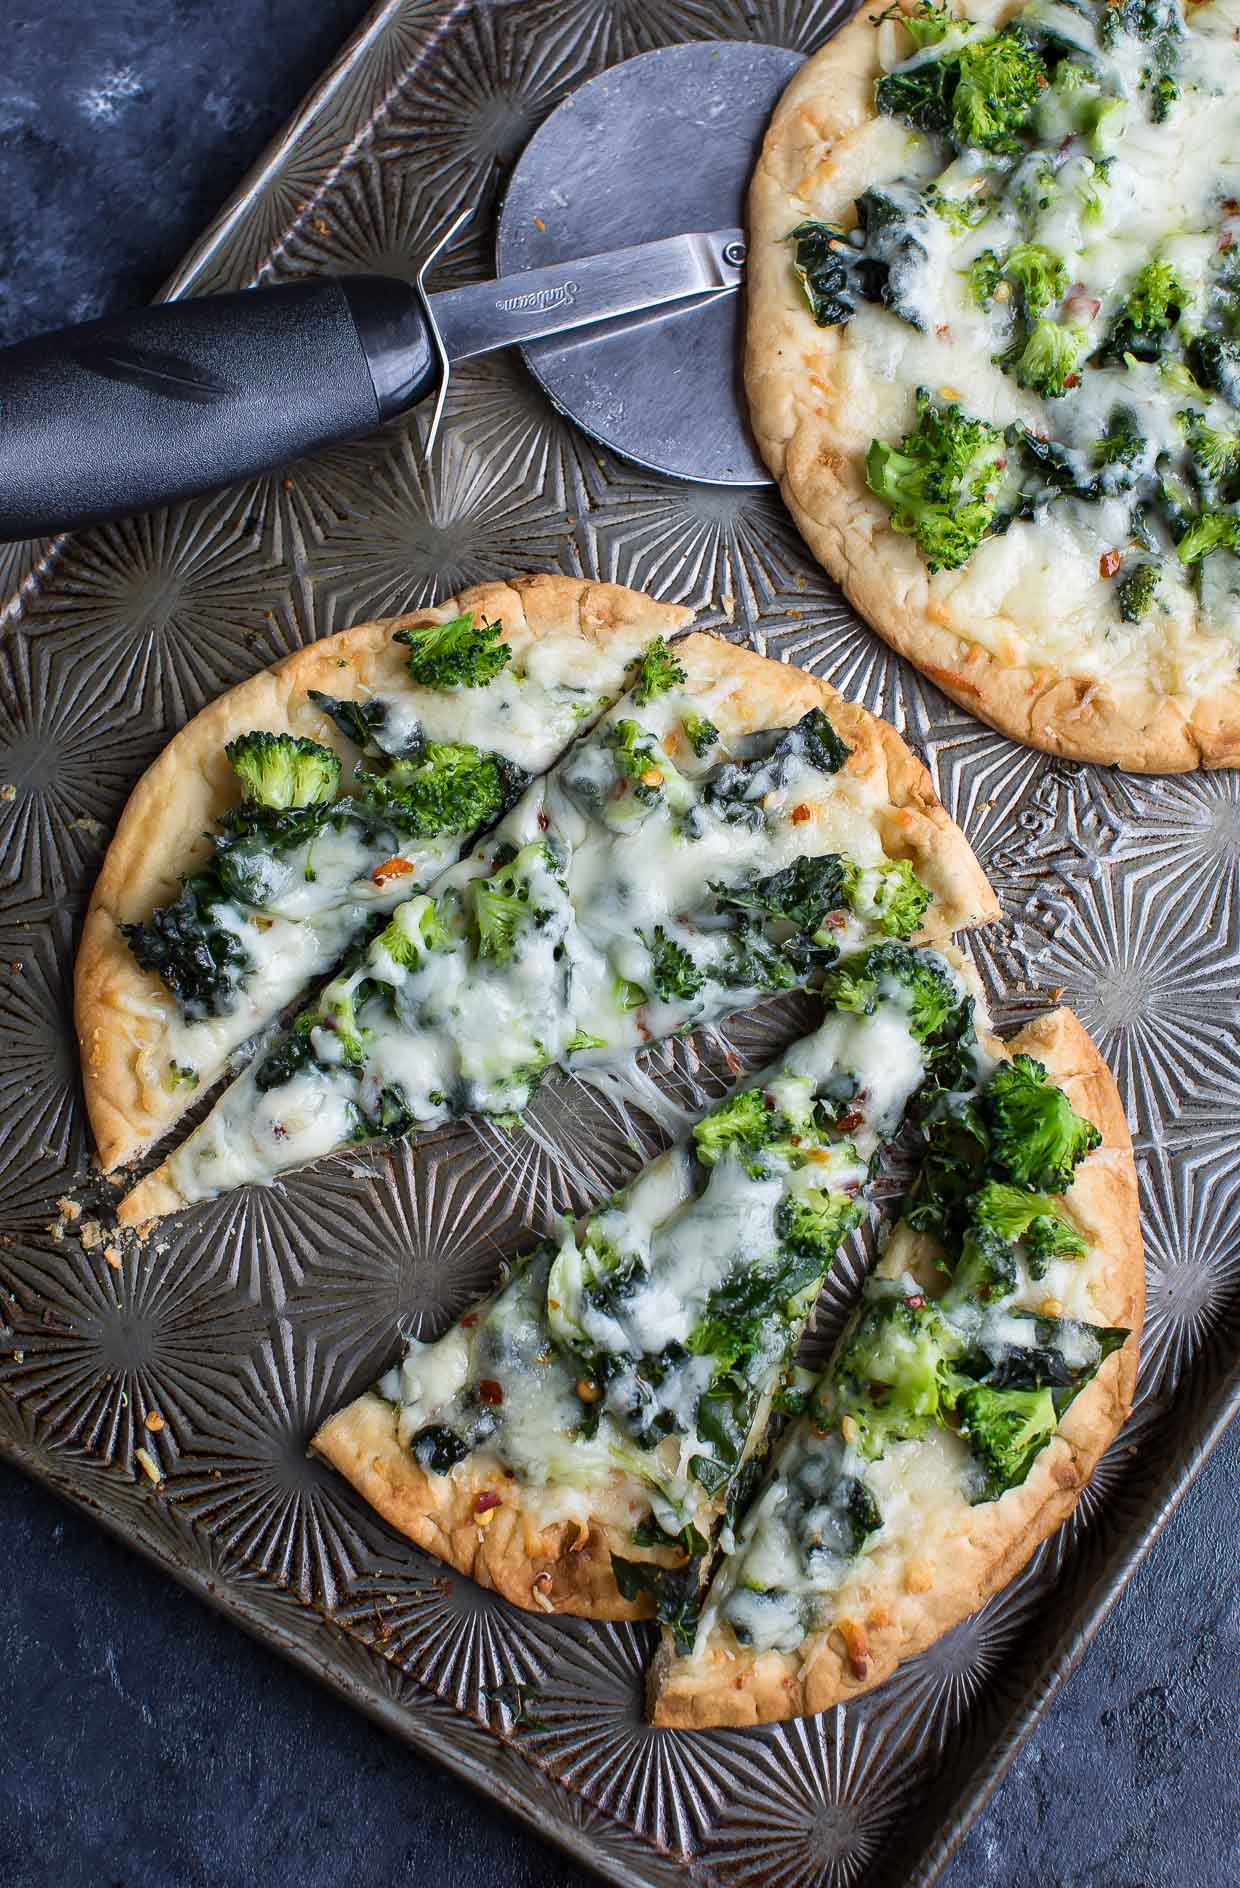 7 must-try flatbread pizza toppings - peas and crayons